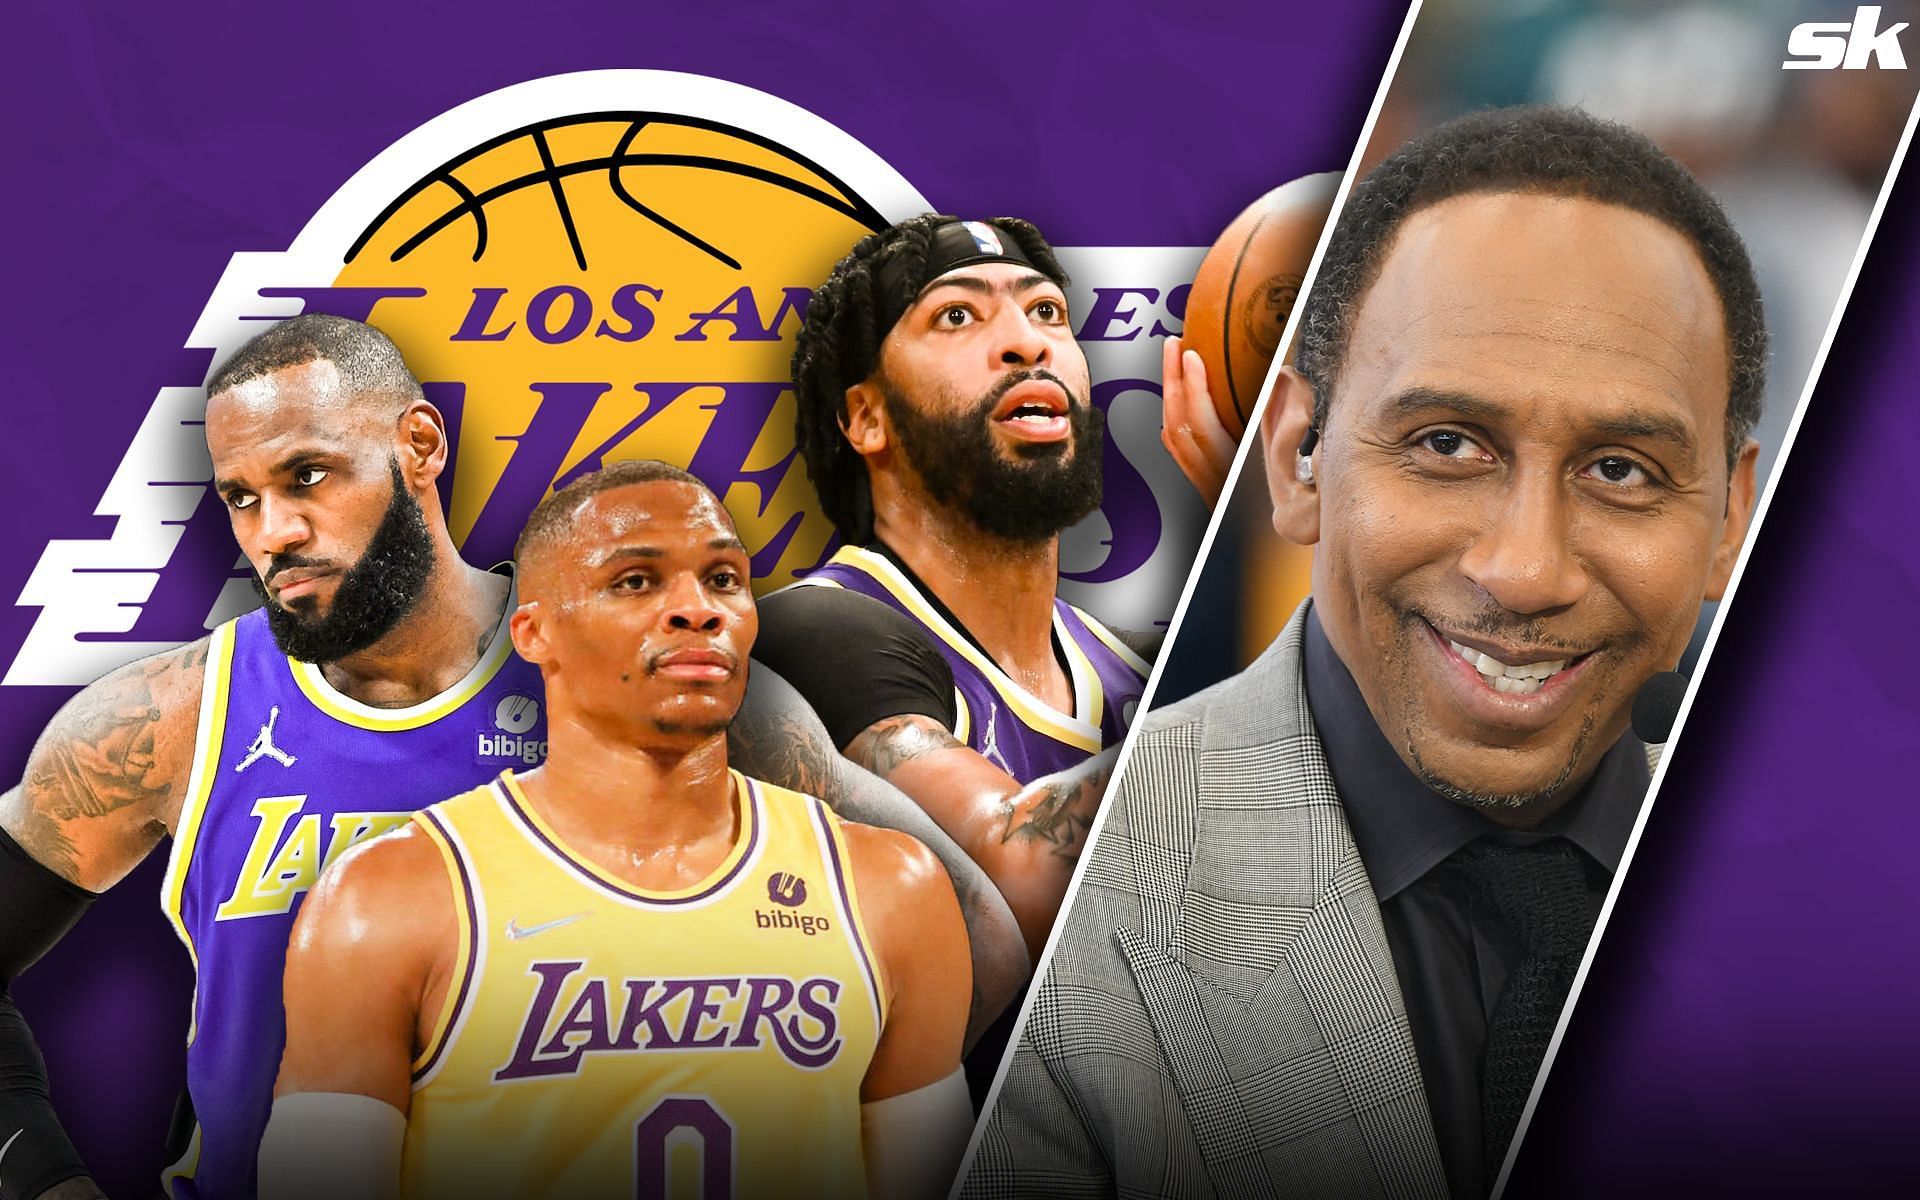 Stephen A. Smith gives his opinion on the LA Lakers